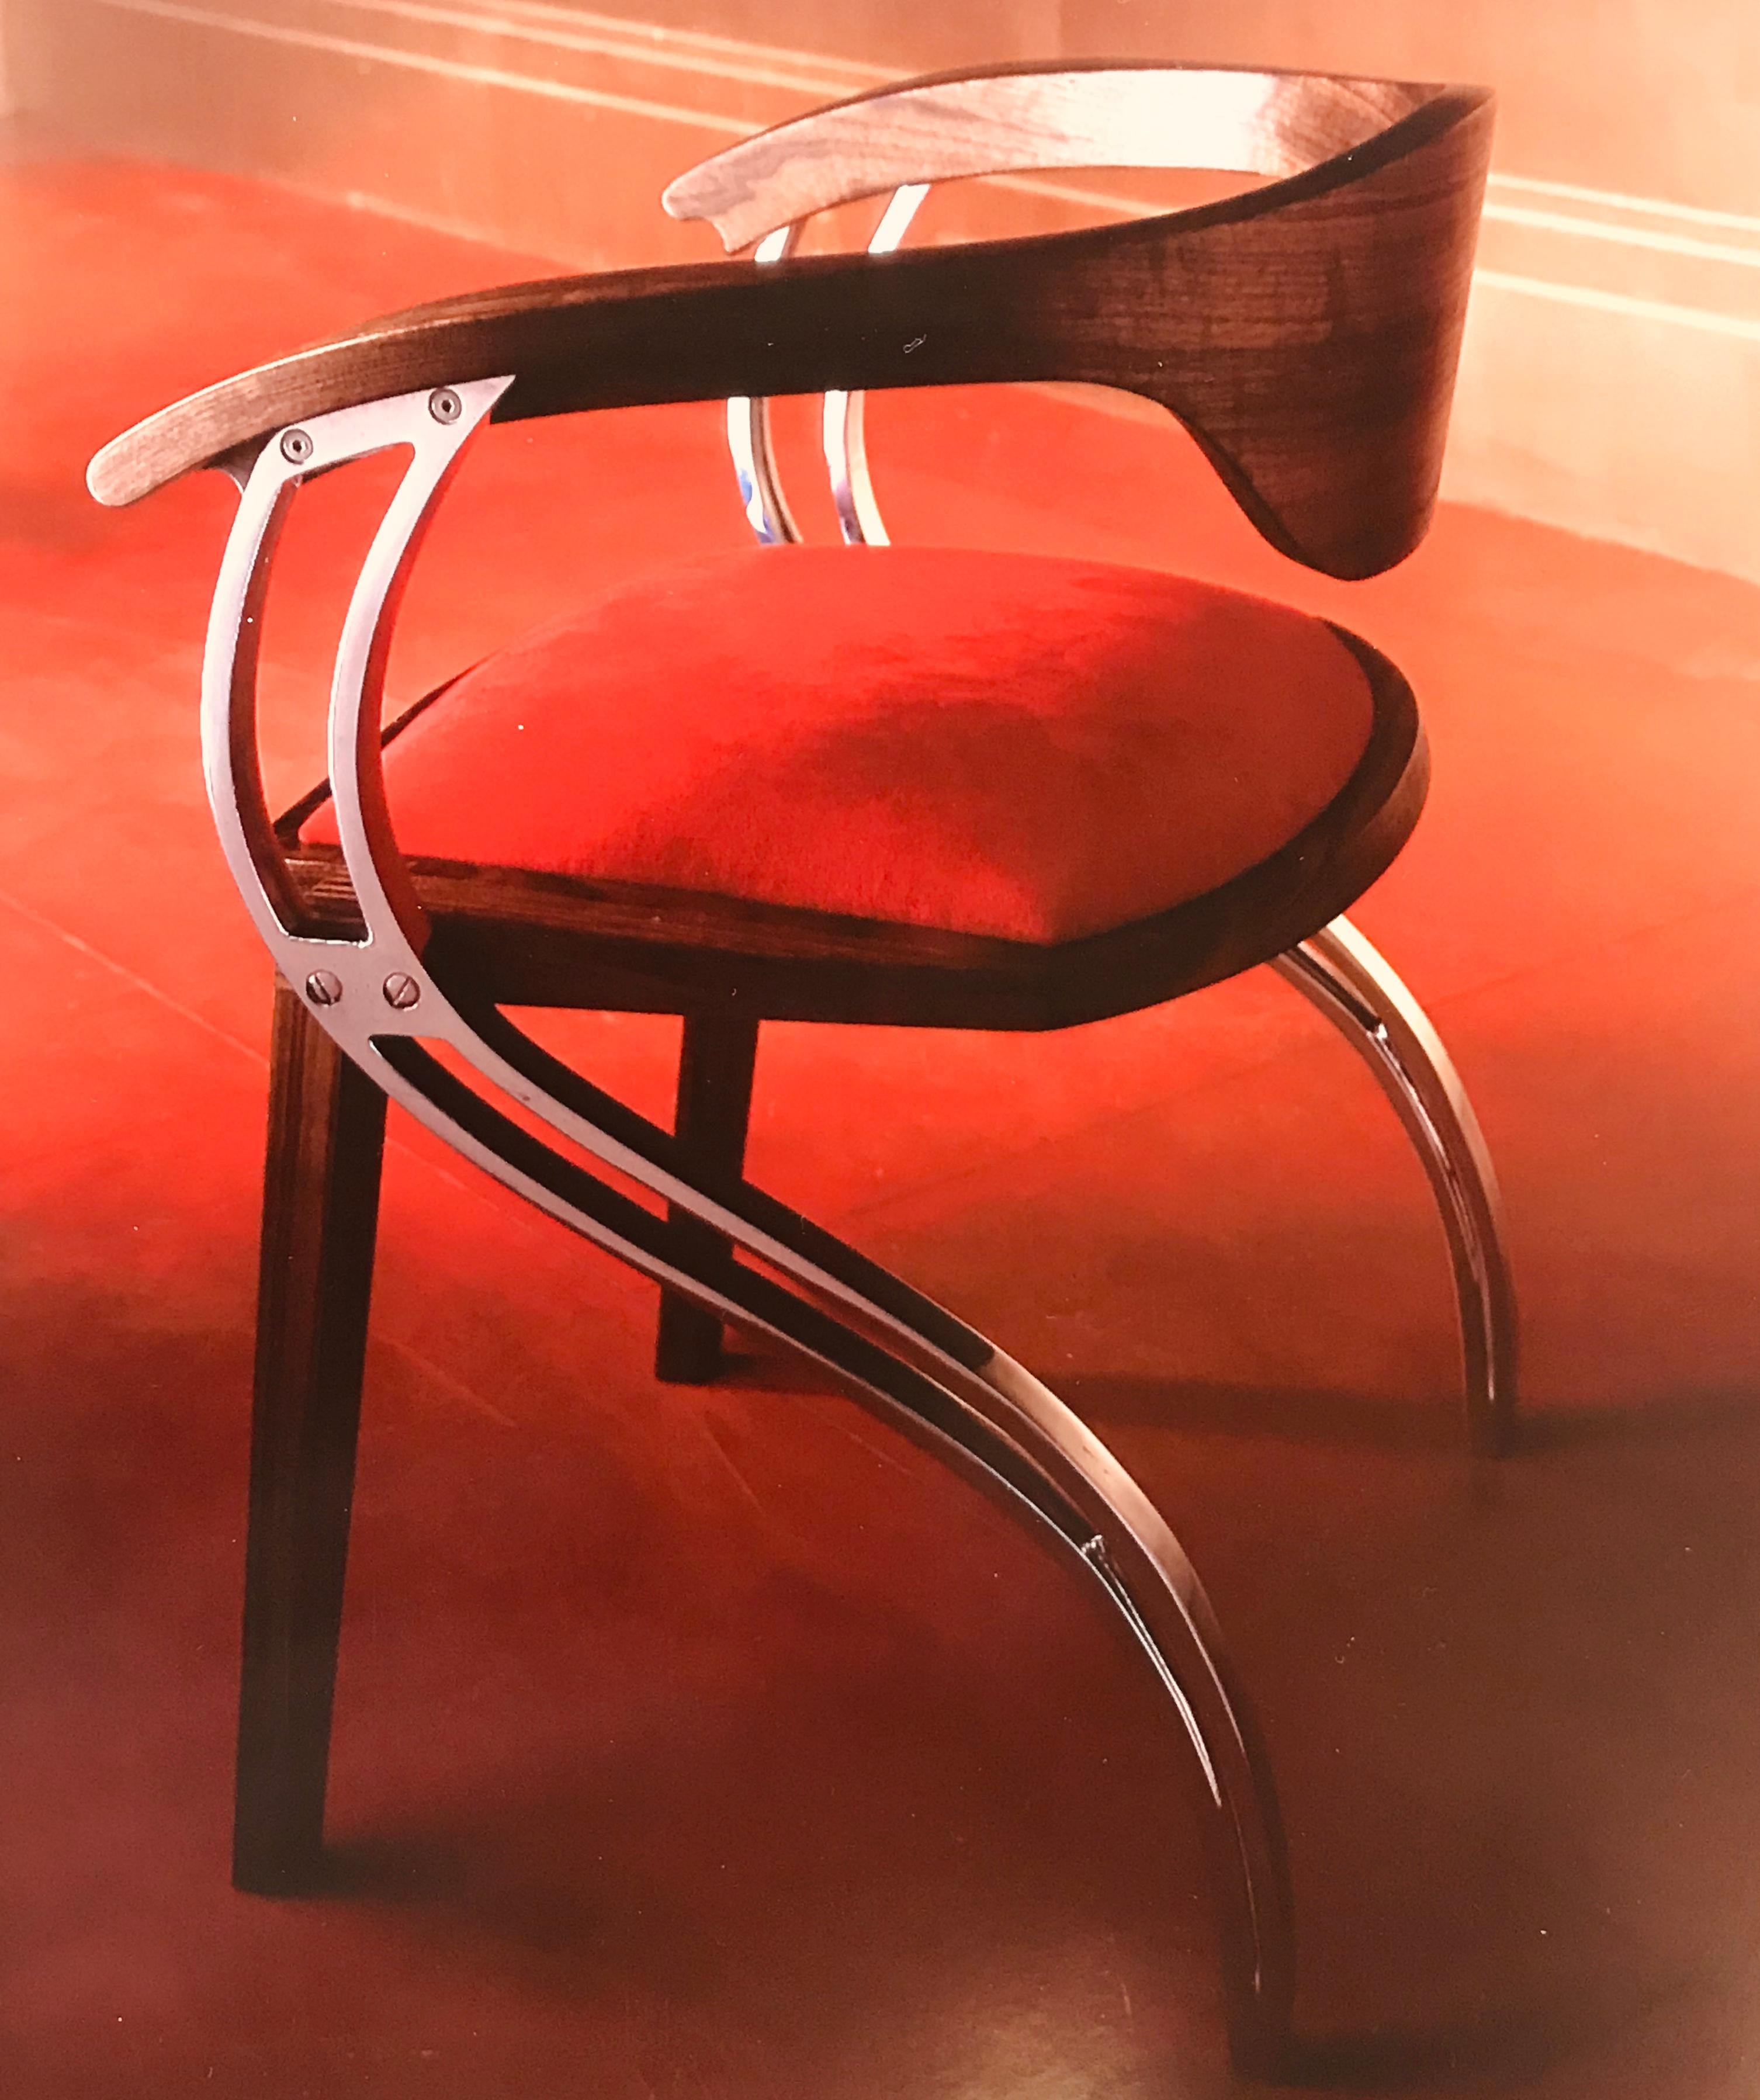 This made to order, elegant and graceful, contemporary chair plays on form and function. The S shaped aluminium legs create lateral supports that catch the seat structure and the 'floating' curved back. This creates a very sculptural, fluid and